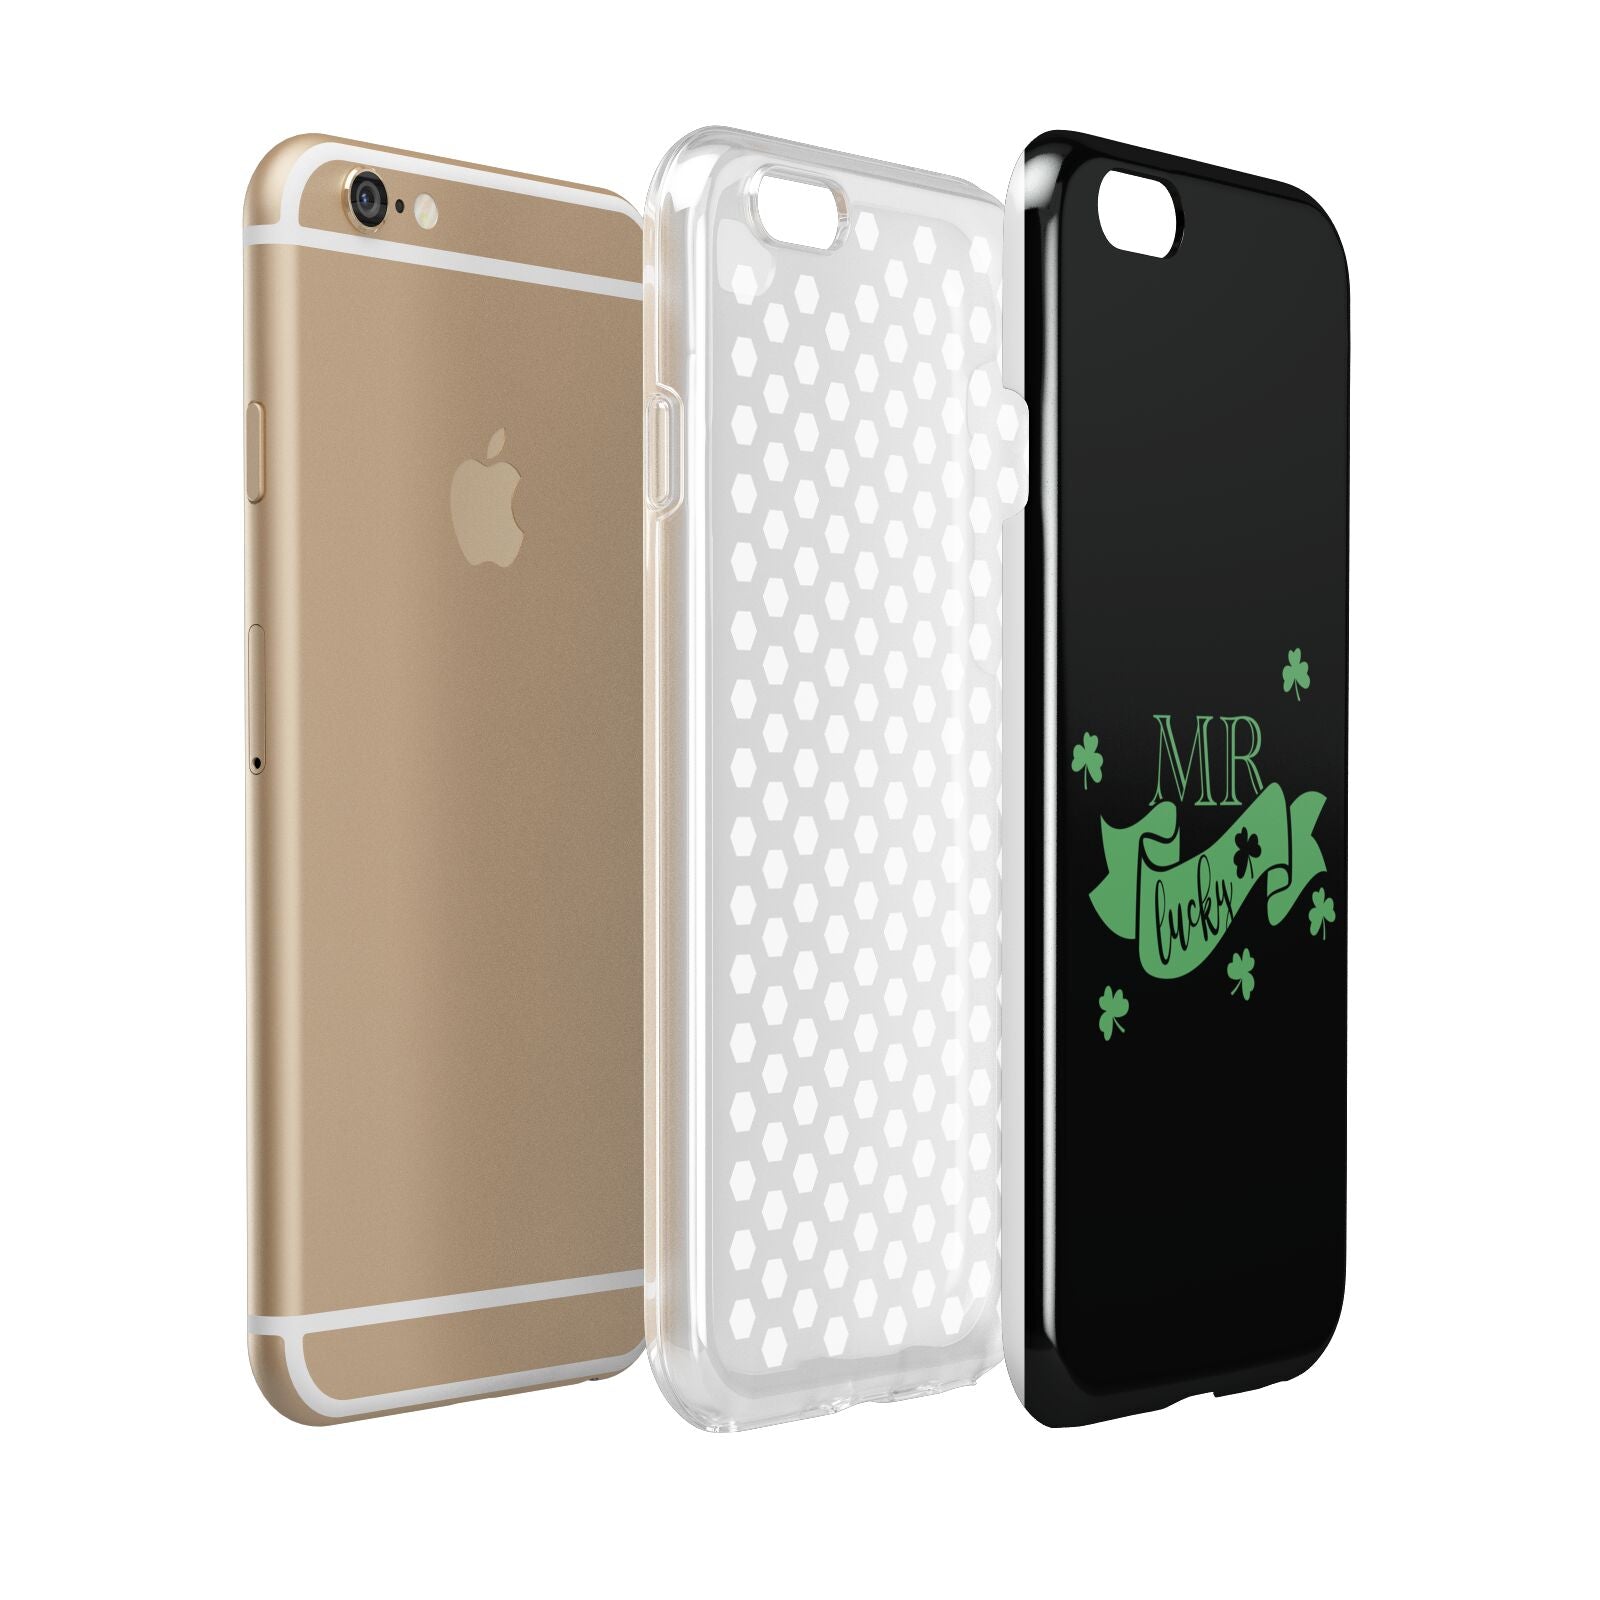 Mr Lucky Apple iPhone 6 3D Tough Case Expanded view